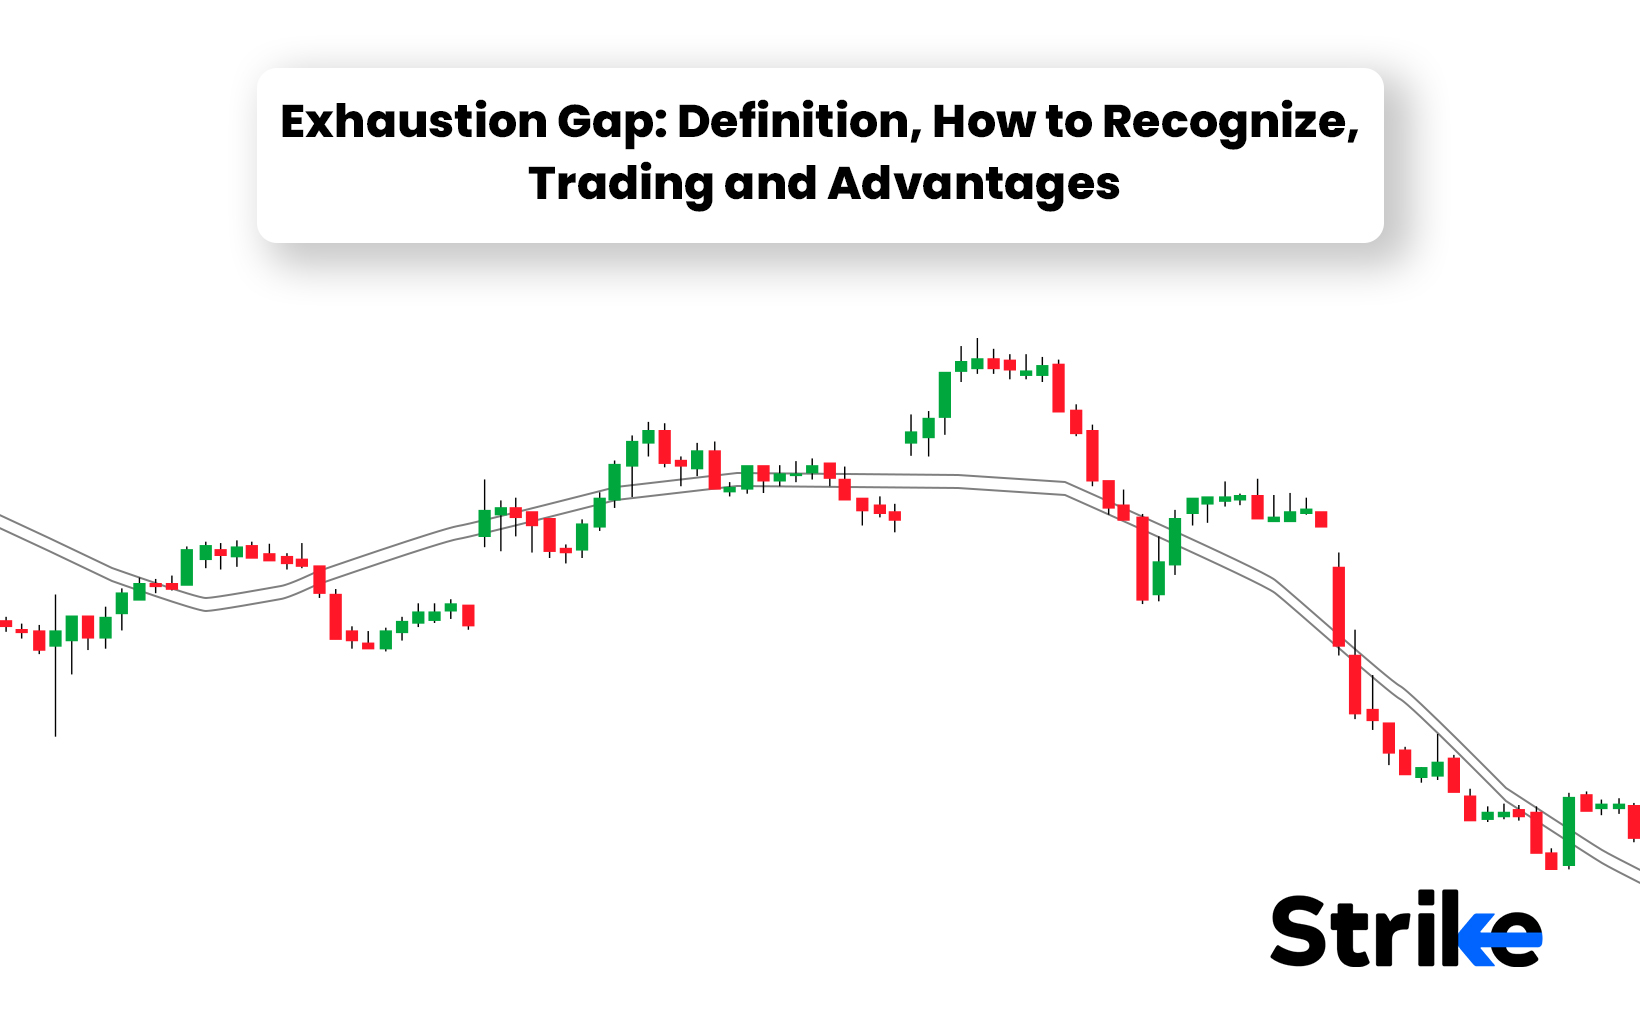 Exhaustion Gap: Definition, How to Recognize, Trading and Advantages